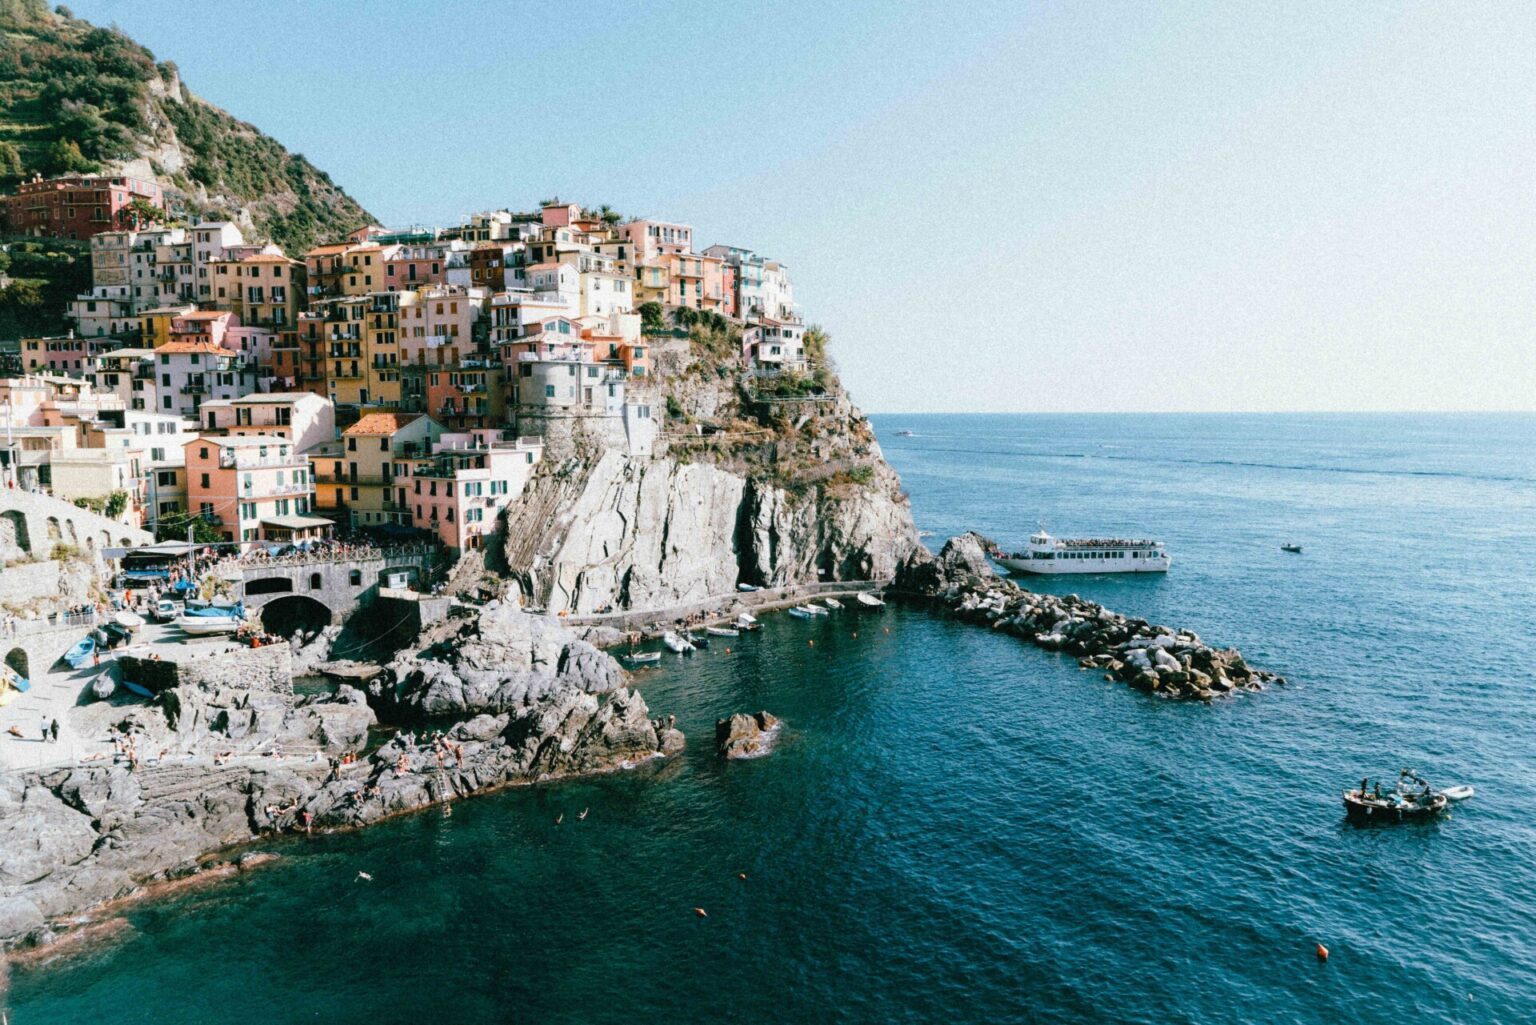 The sun-drenched cliffs and pastel-coloured houses of Manarola in the Cinque Terre, one of Europe's most popular summer destinations.